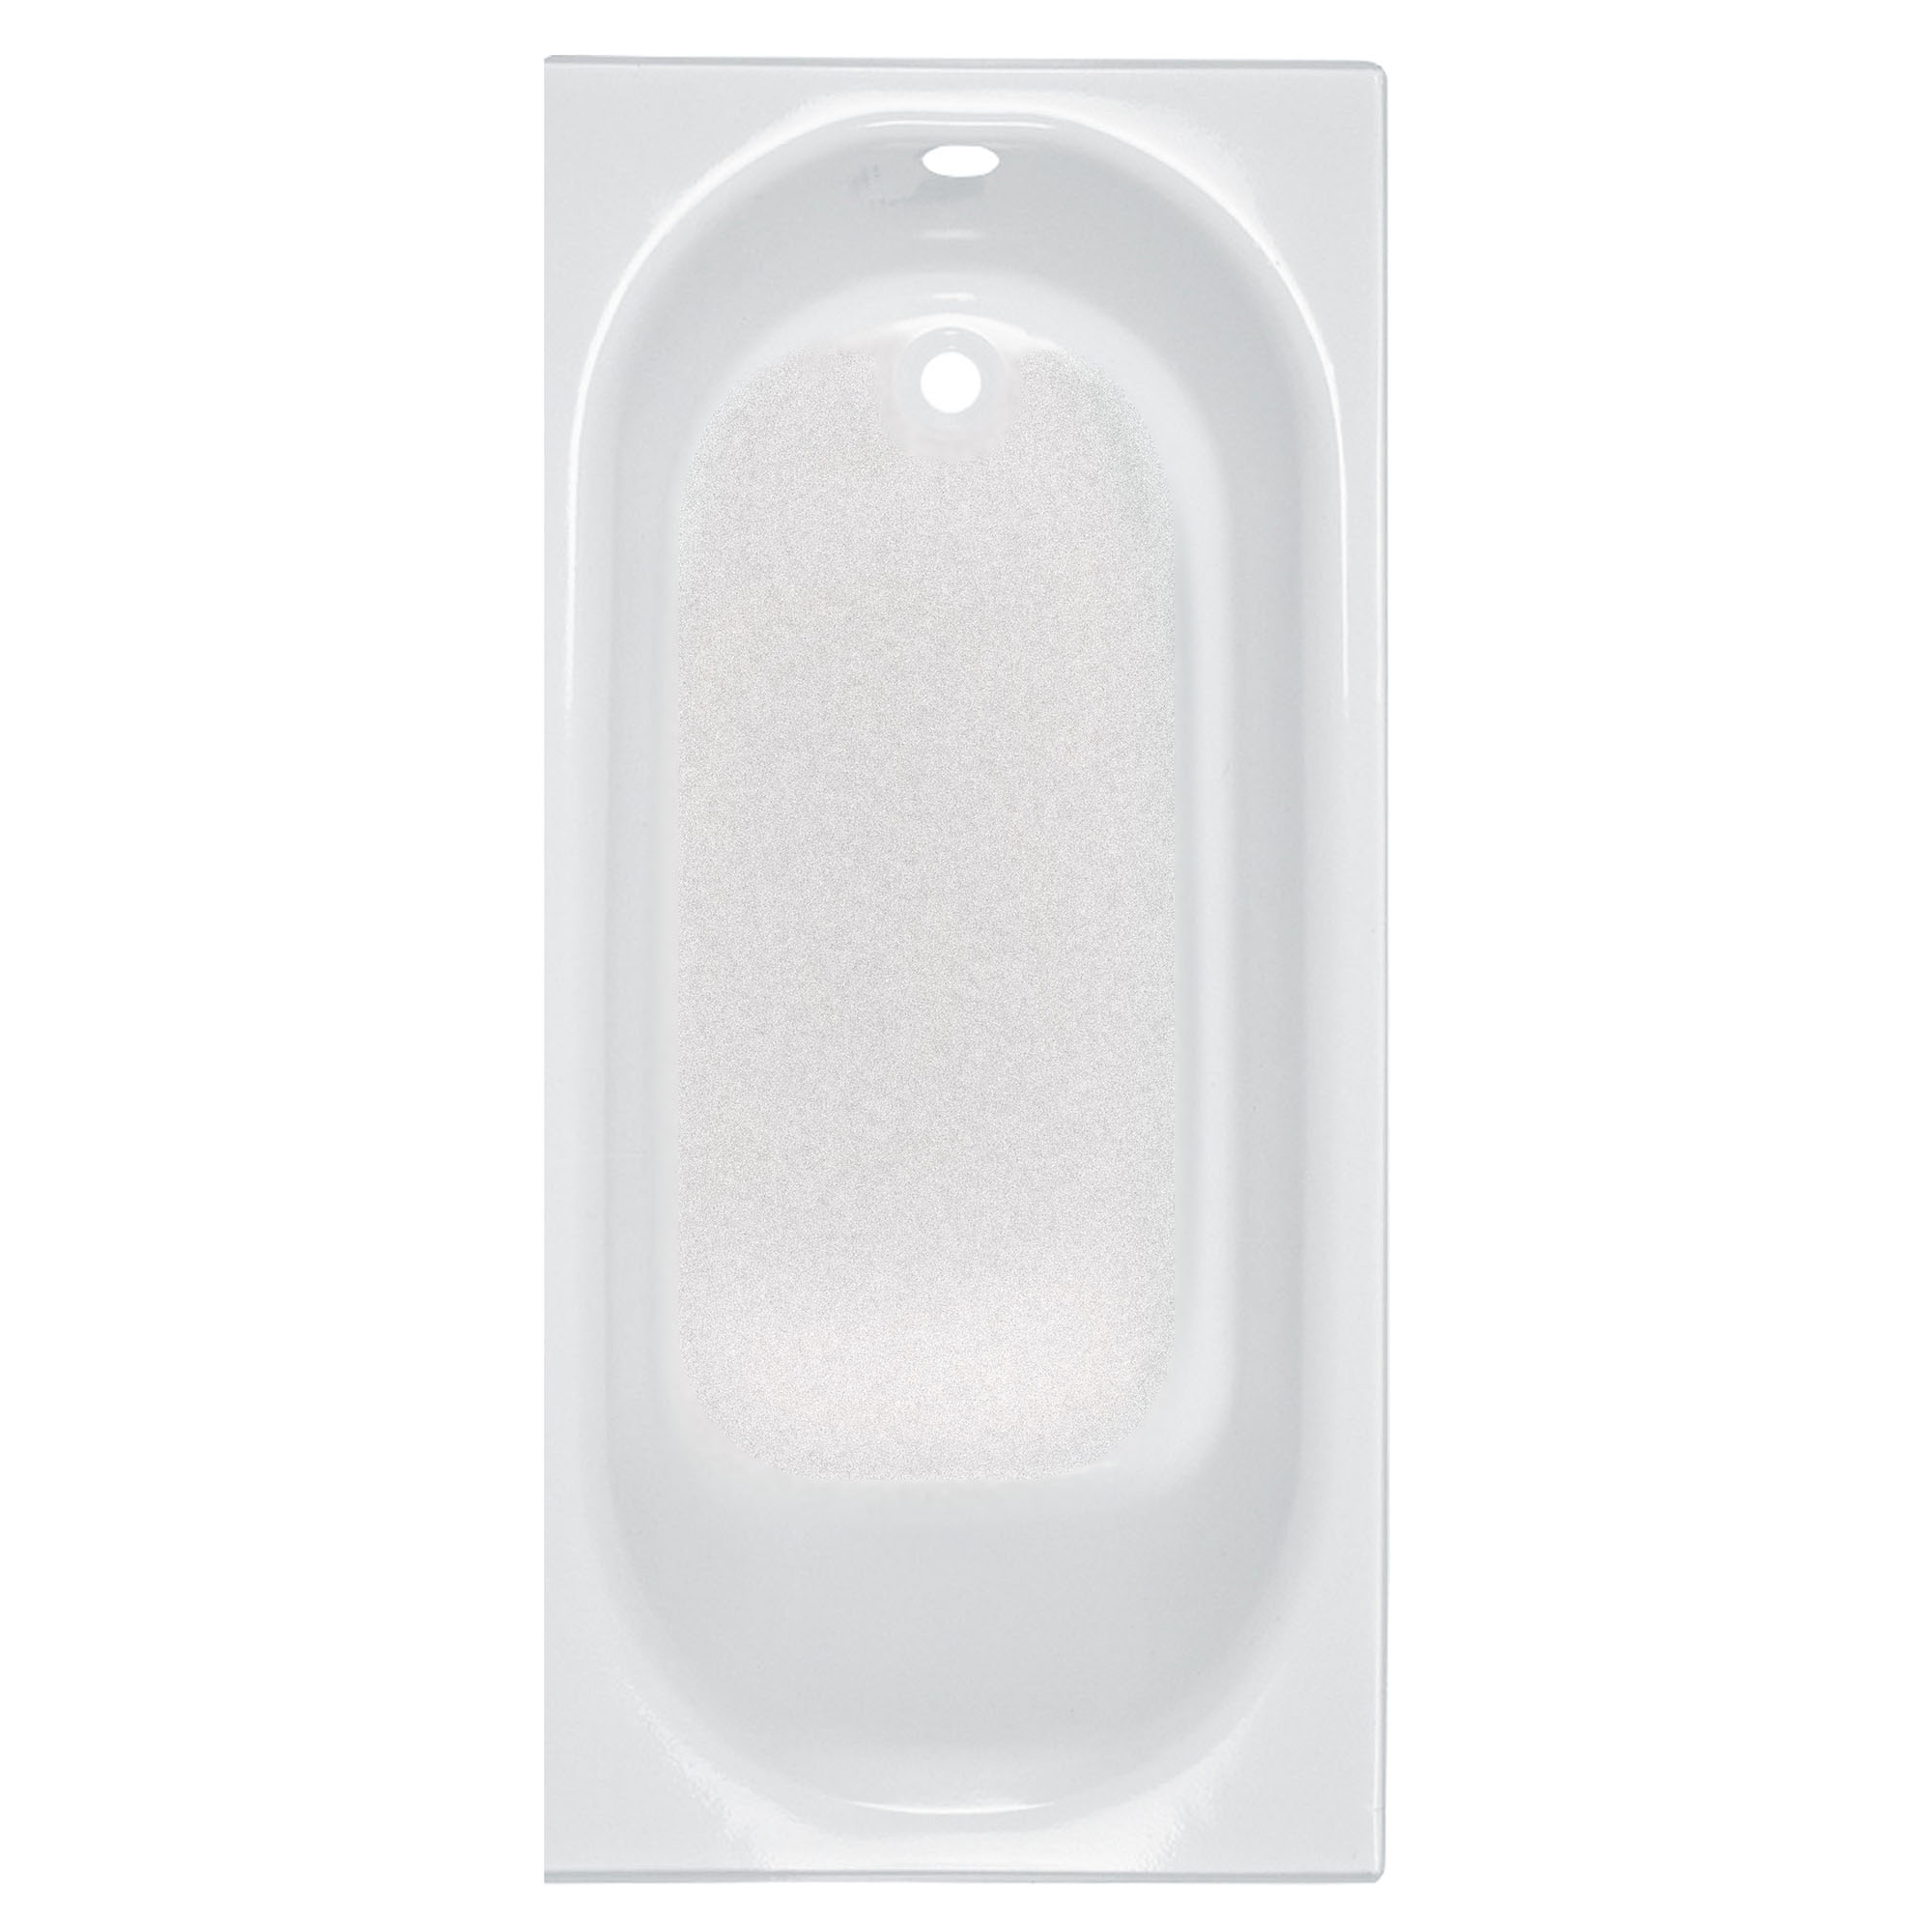 Princeton™ Americast™ 60 x 30-Inch Integral Apron Bathtub Above Floor Rough with Right-Hand Outlet